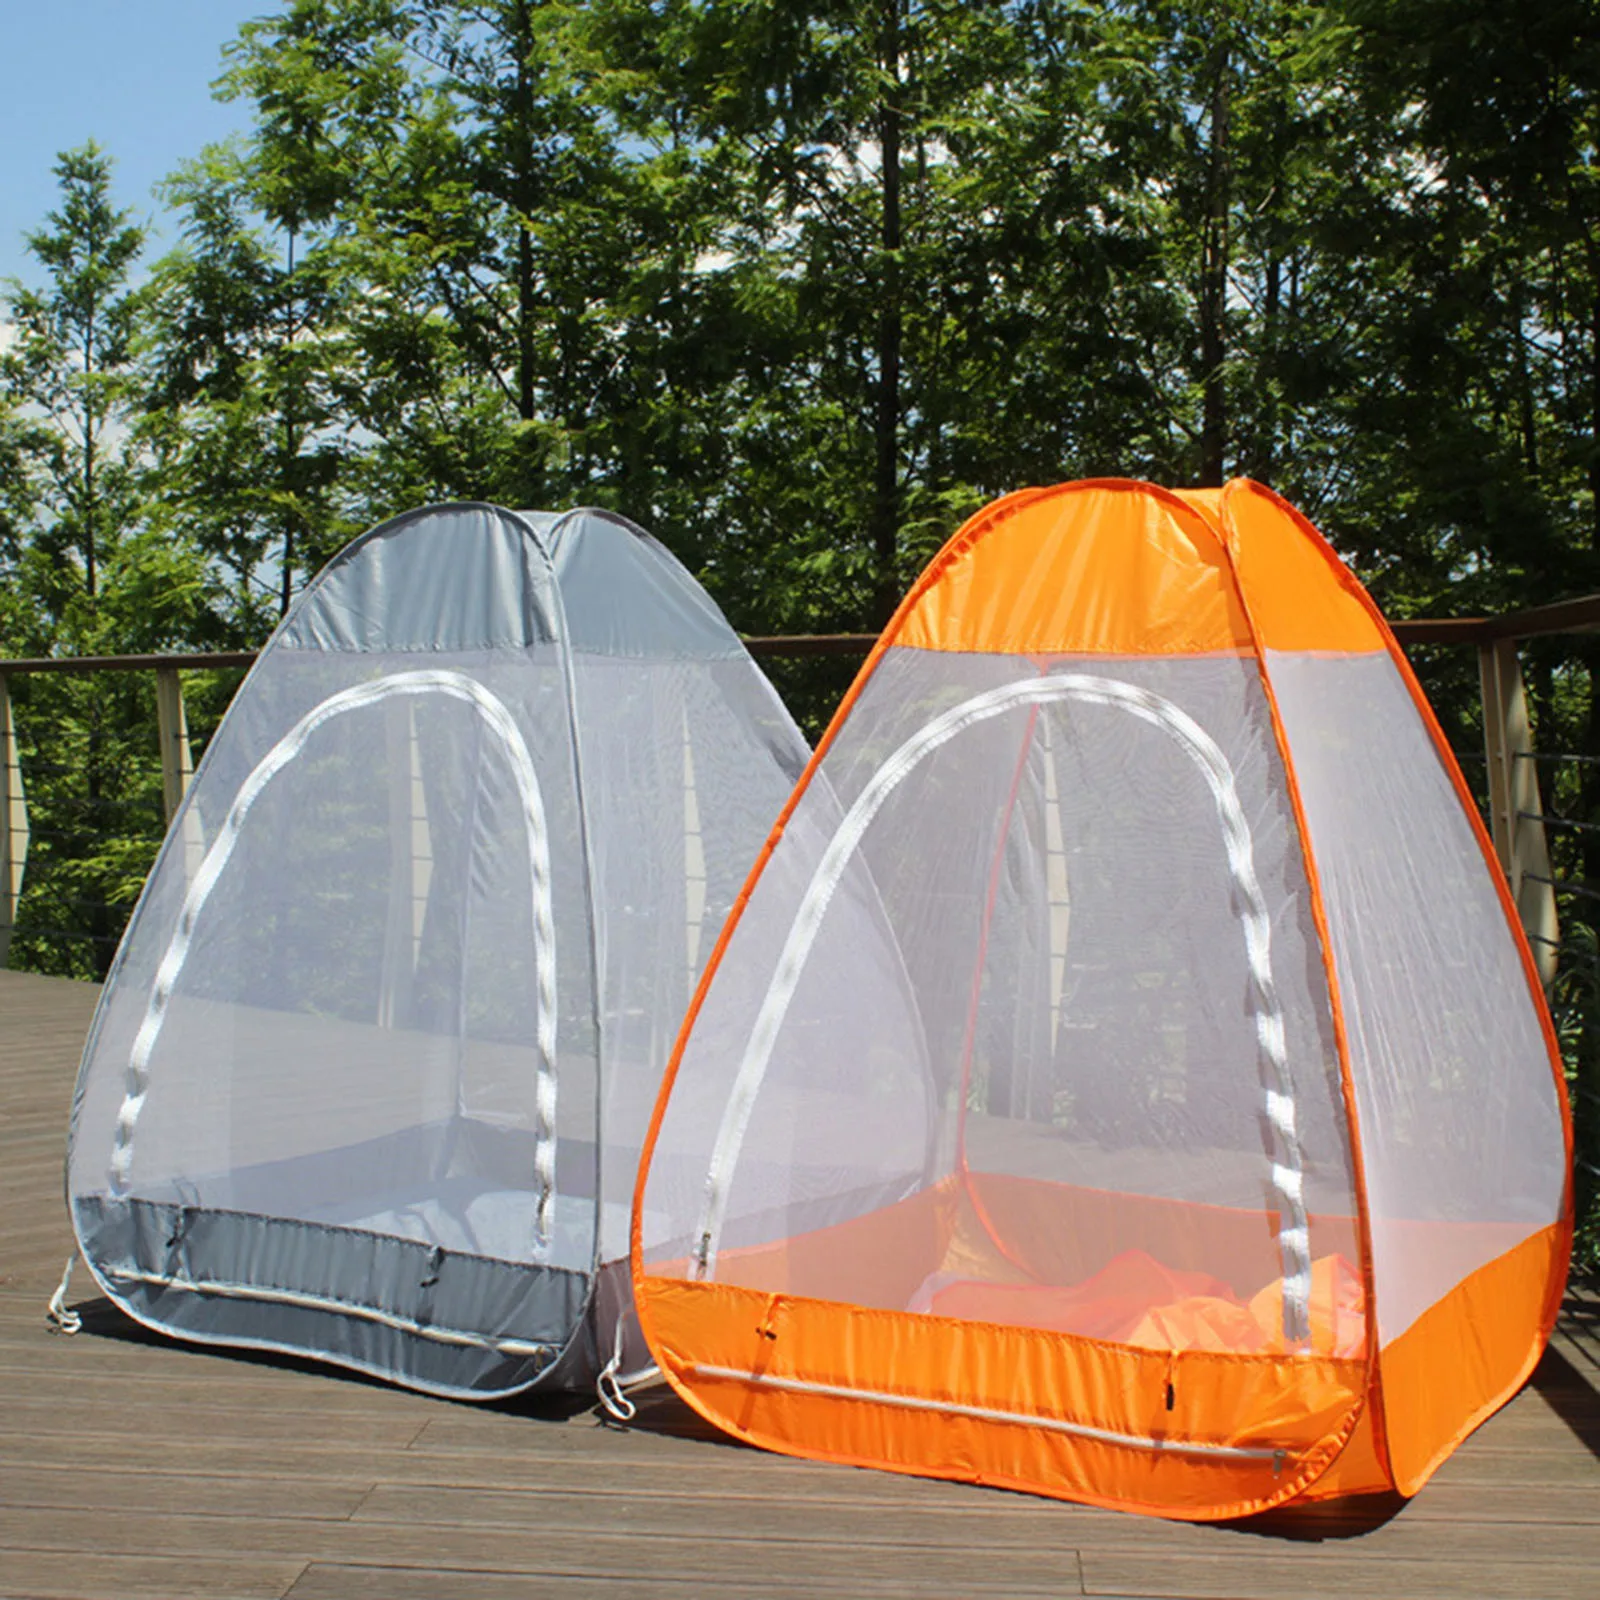 

Hot Sale Buddhist Meditation Tent Single Mosquito Net Temples Sit-in Free-standing Shelter Cabana Quick Folding Camping Tent Par